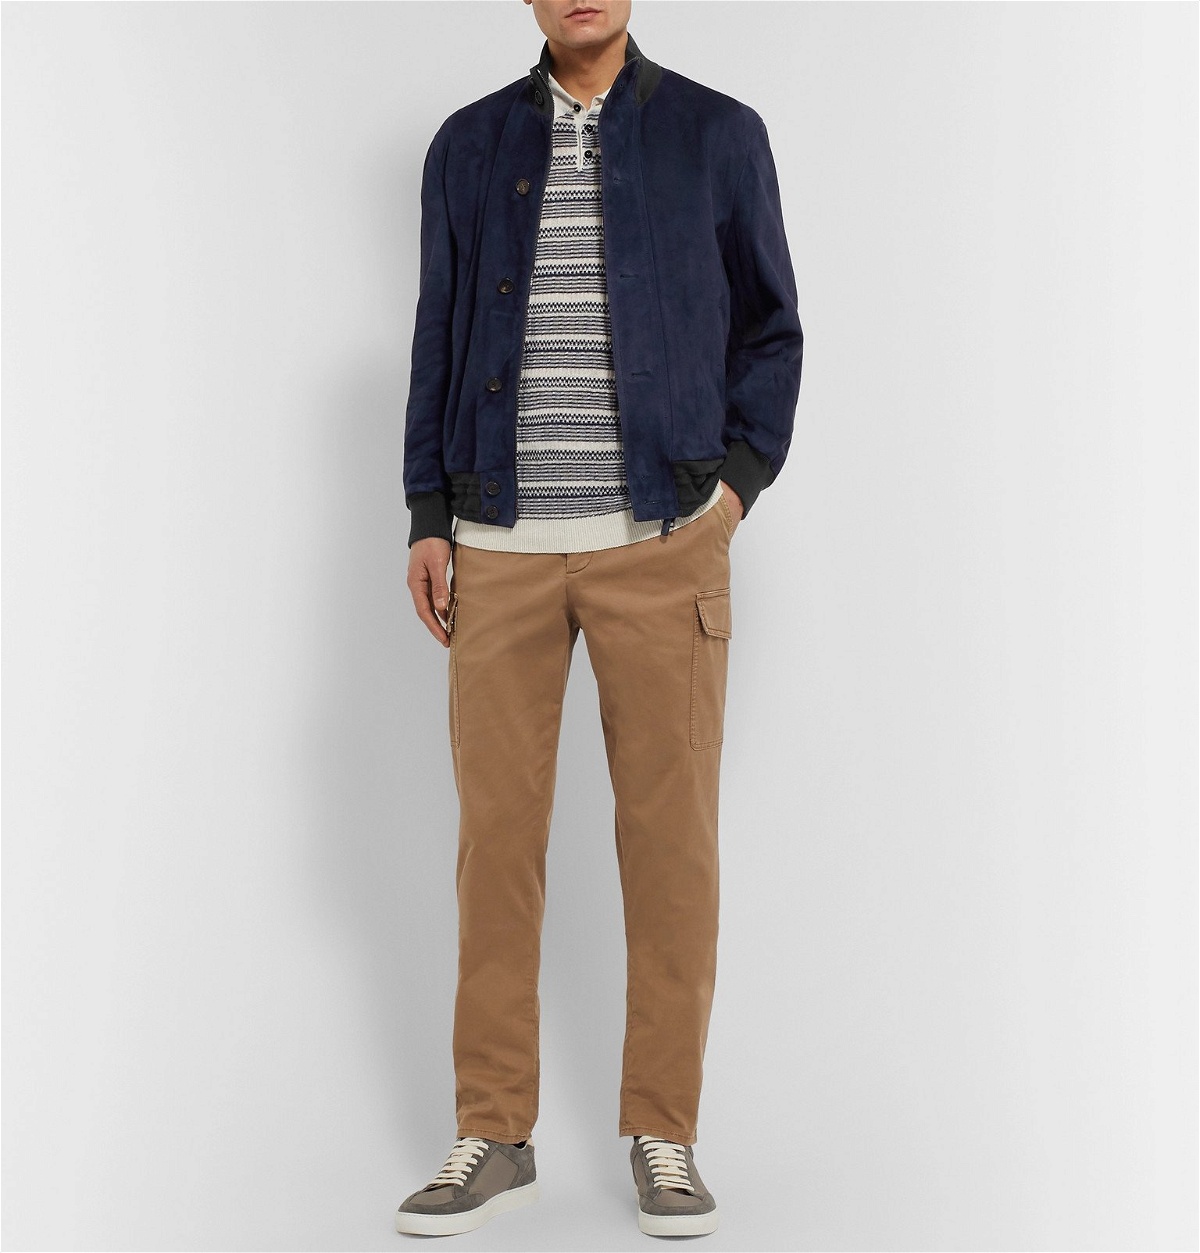 Brioni - Suede and Wool Bomber Jacket - Blue